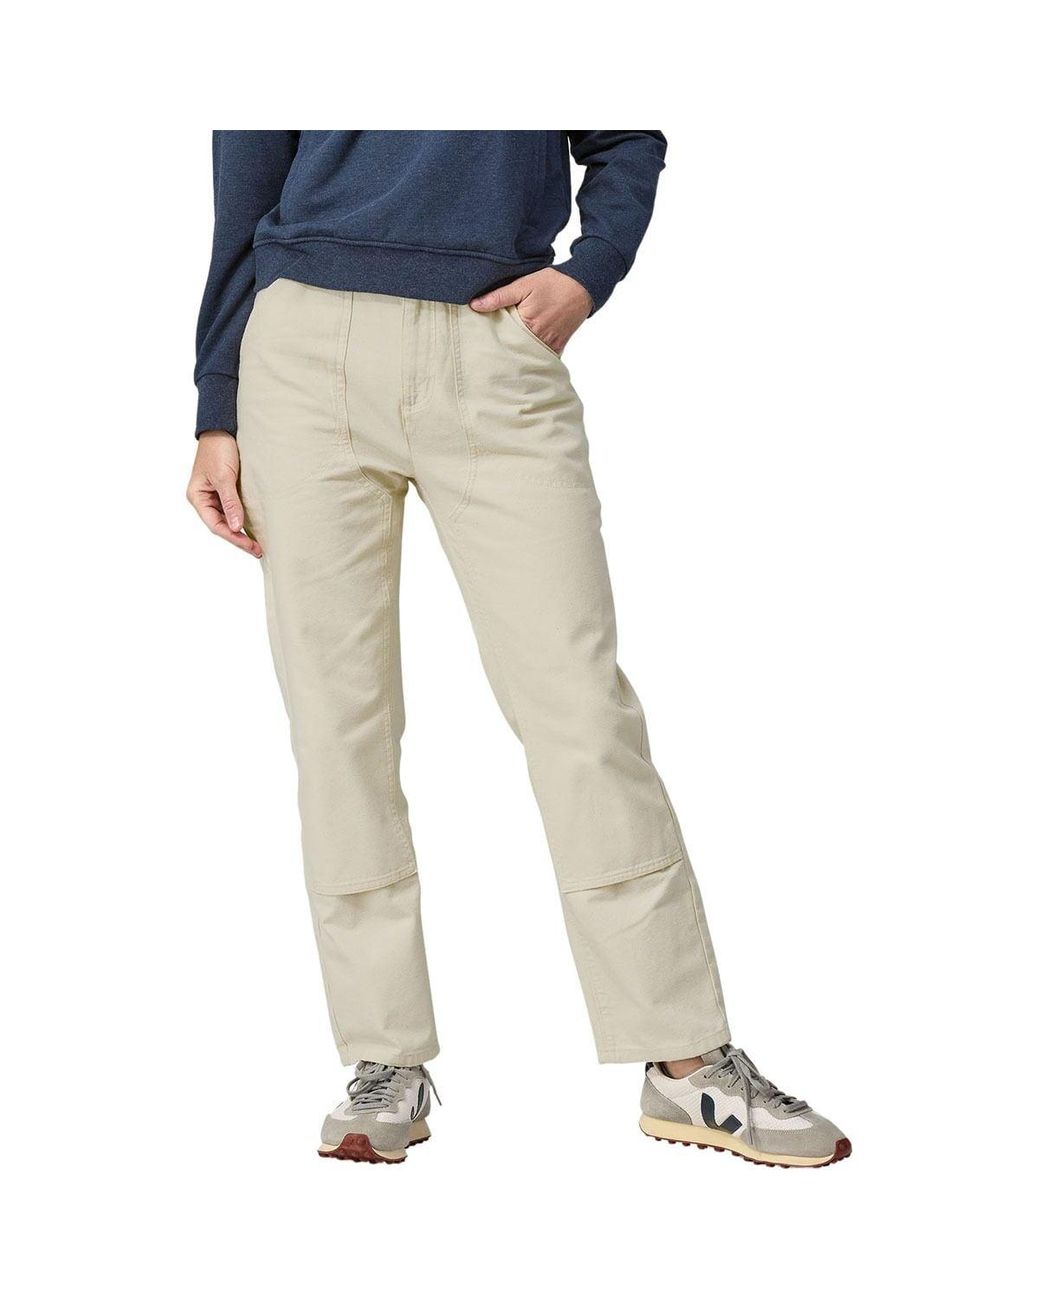 https://cdna.lystit.com/1040/1300/n/photos/backcountry/d6419612/patagonia-Undyed-Natural-Heritage-Stand-Up-Pant.jpeg